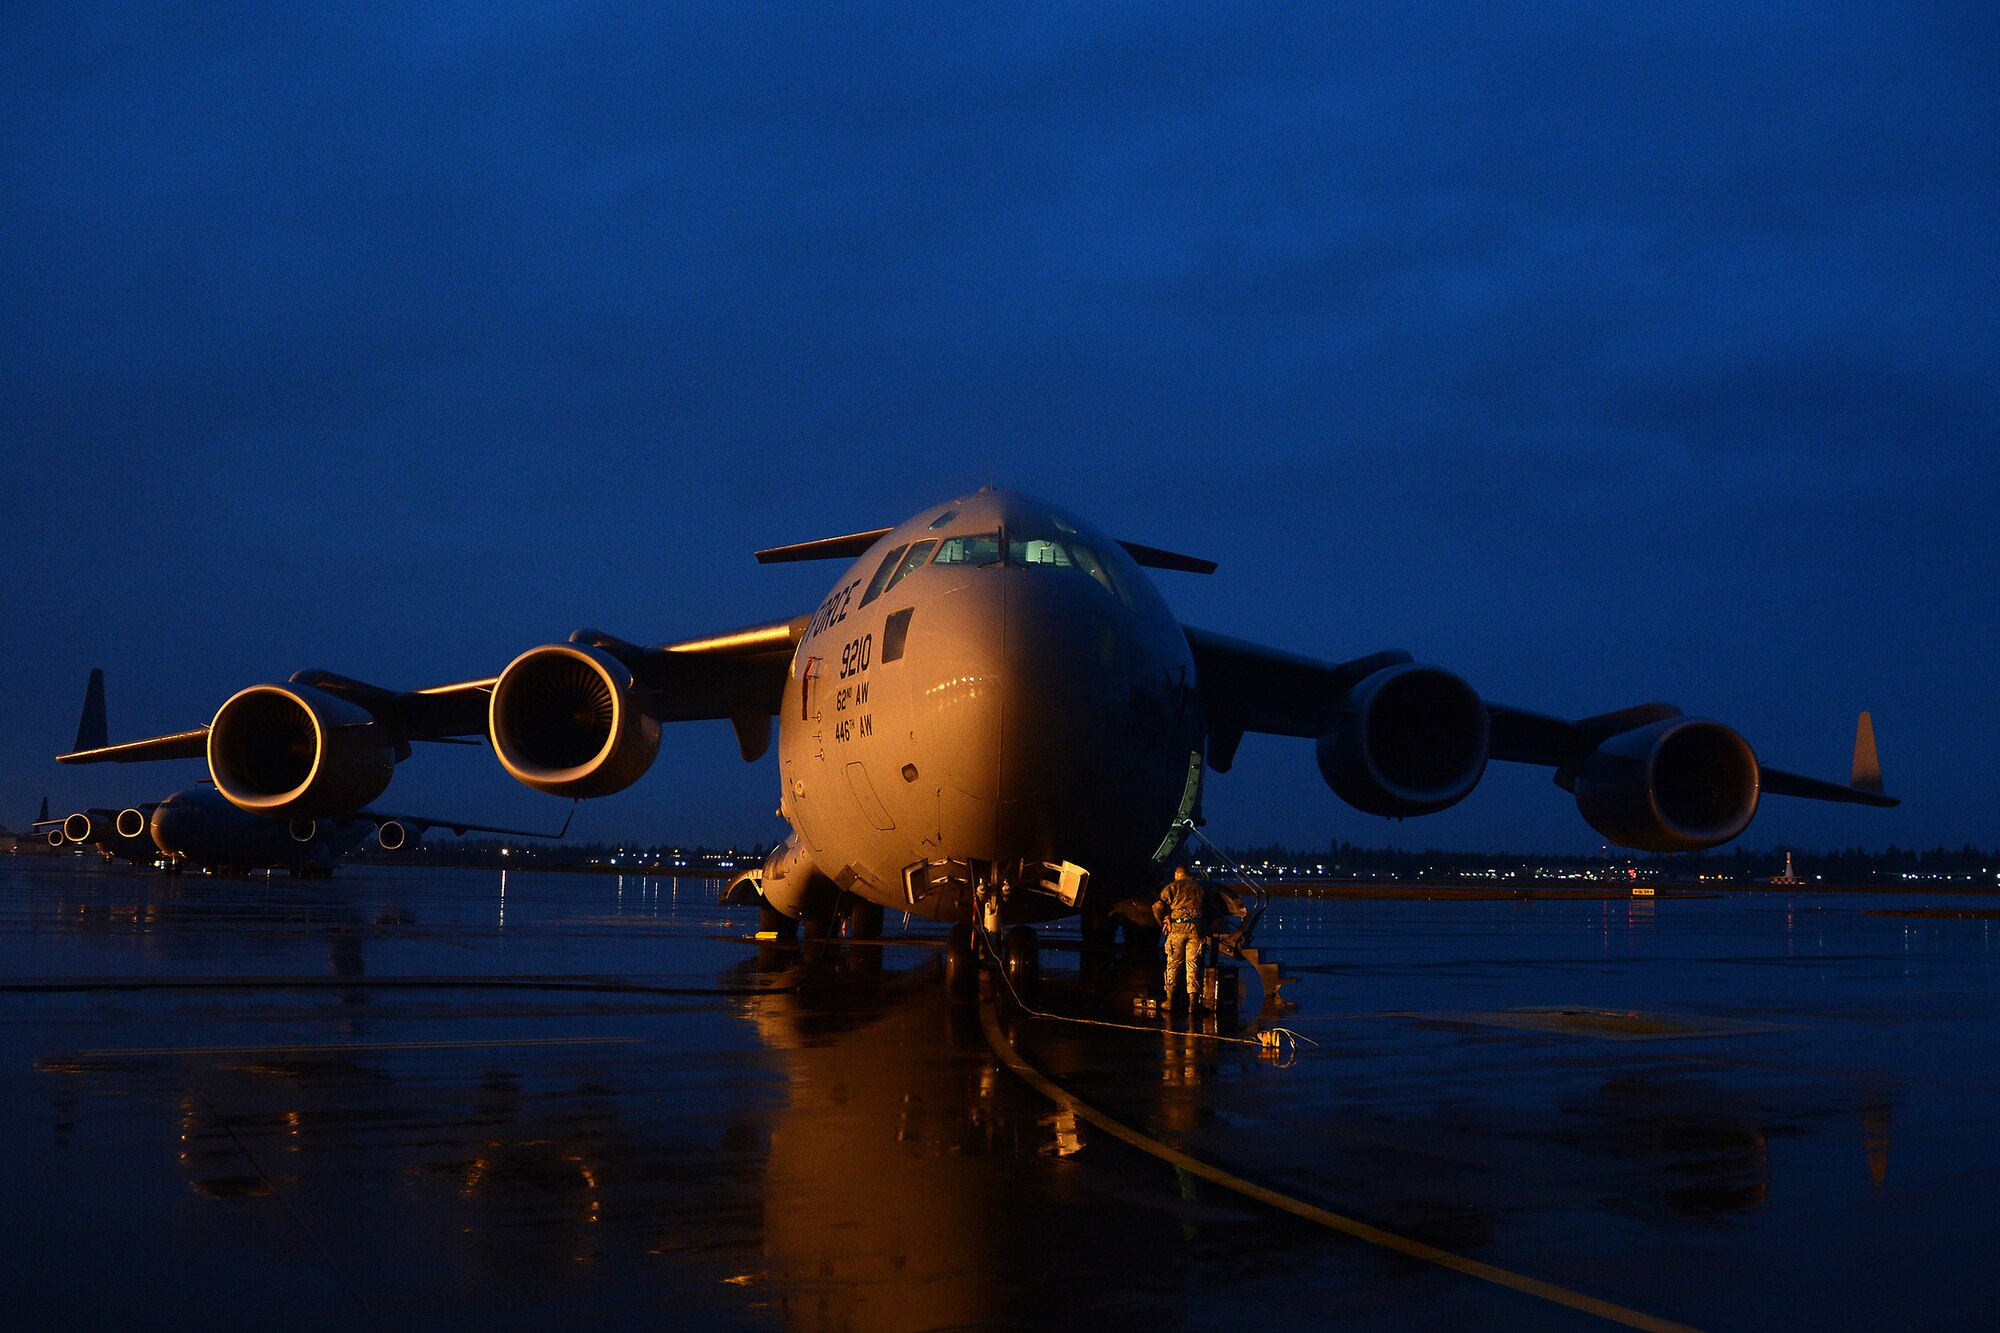 Airmen from the 62nd Airlift Wing prepare a C-17 Globmaster III for Operation Deep Freeze Feb. 7, 2015 at Joint Base Lewis-McChord, Wash. Operation Deep Freeze is the support mission for the National Science Foundation’s work in Antarctica. (U.S. Air Force photo\ Staff Sgt. Tim Chacon)